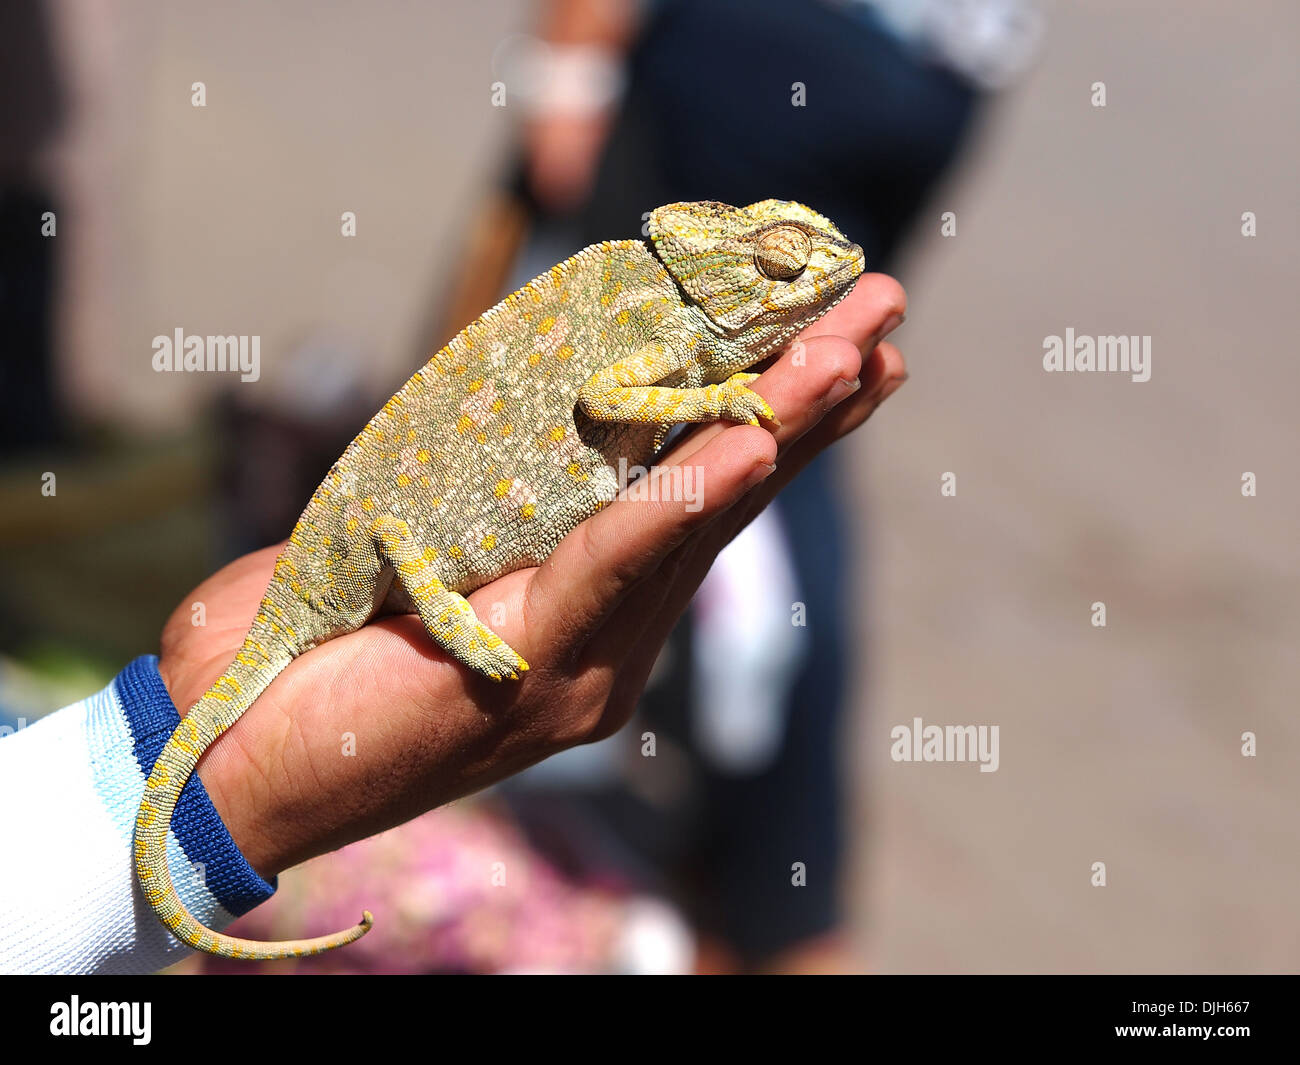 cameleon sleaping on the boys hand Stock Photo